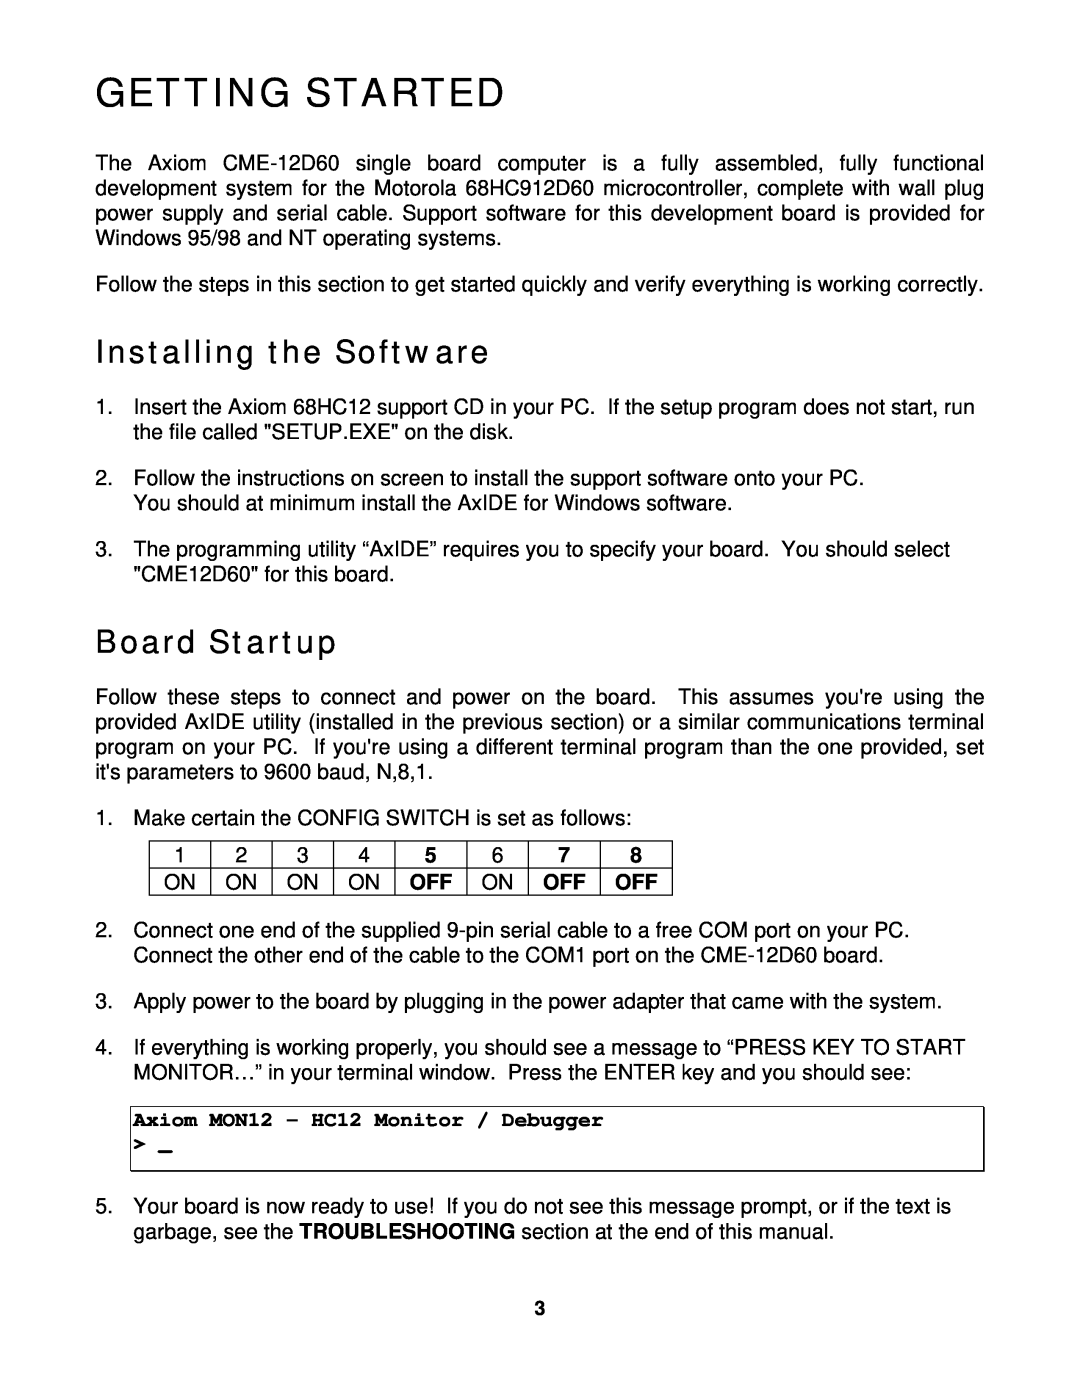 Motorola CME-12D60 manual Getting Started, Installing the Software, Board Startup 